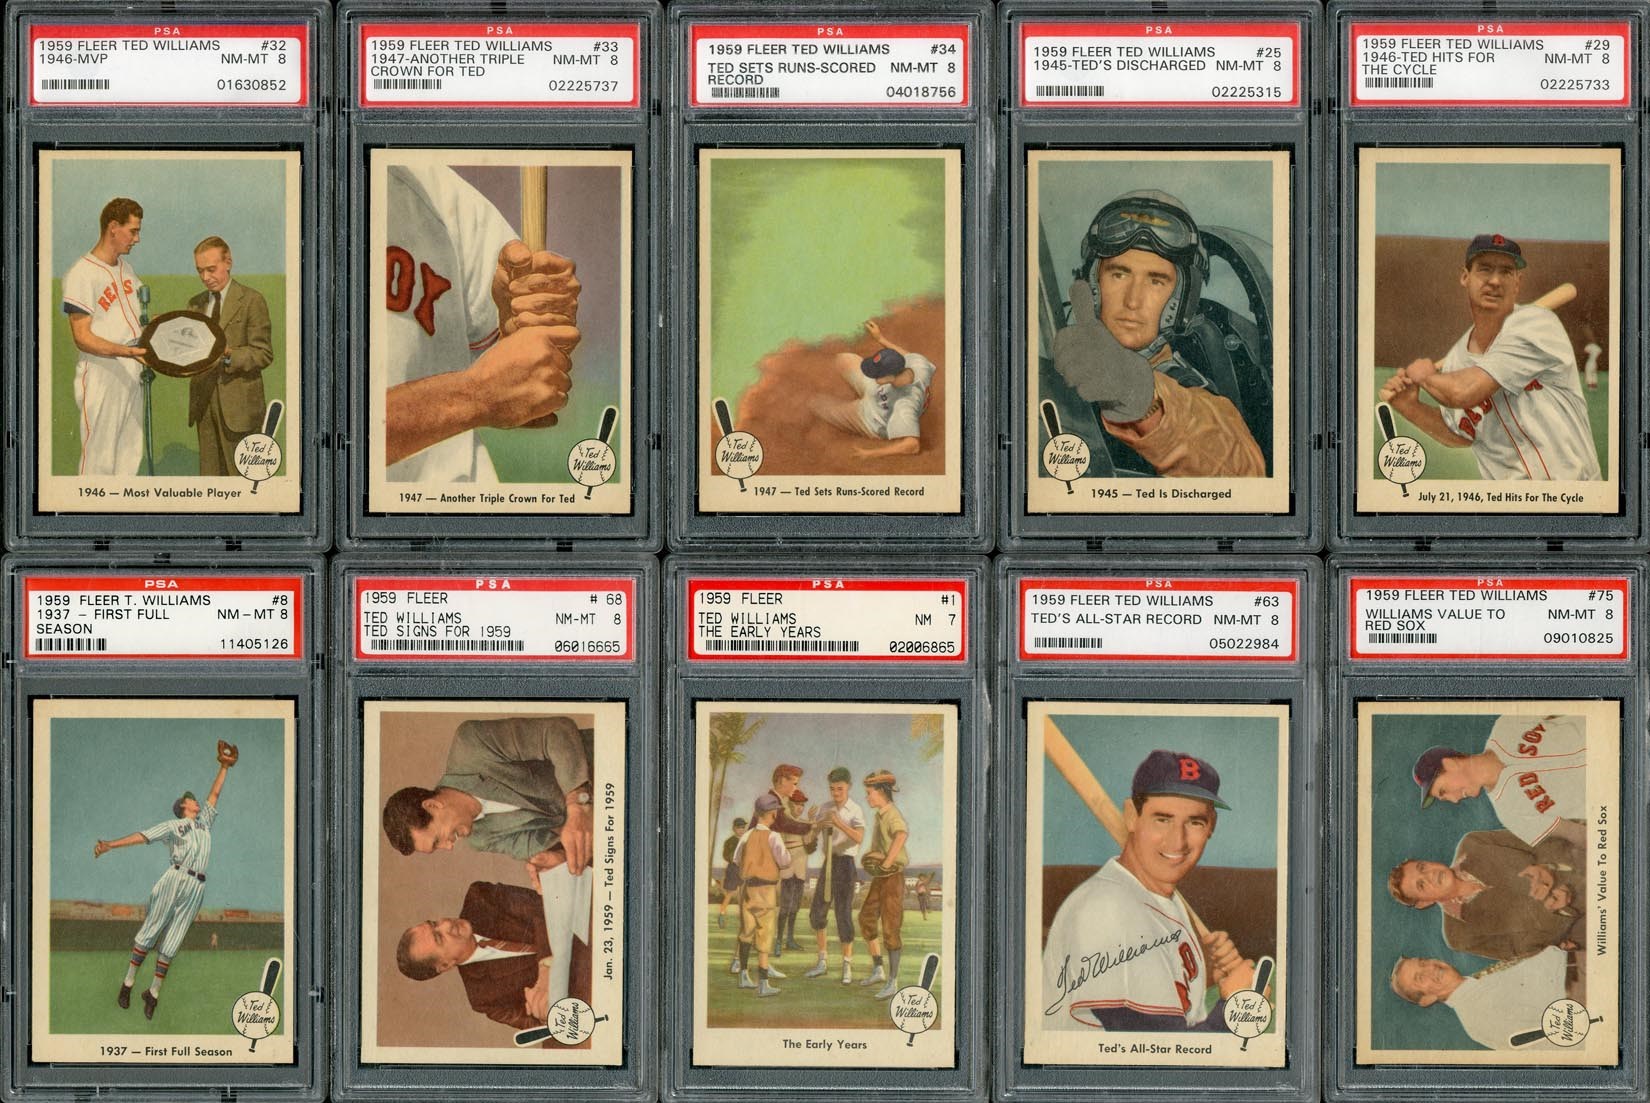 Baseball and Trading Cards - High Grade 1959 Fleer Ted Williams PSA Graded Complete Set (80/80)